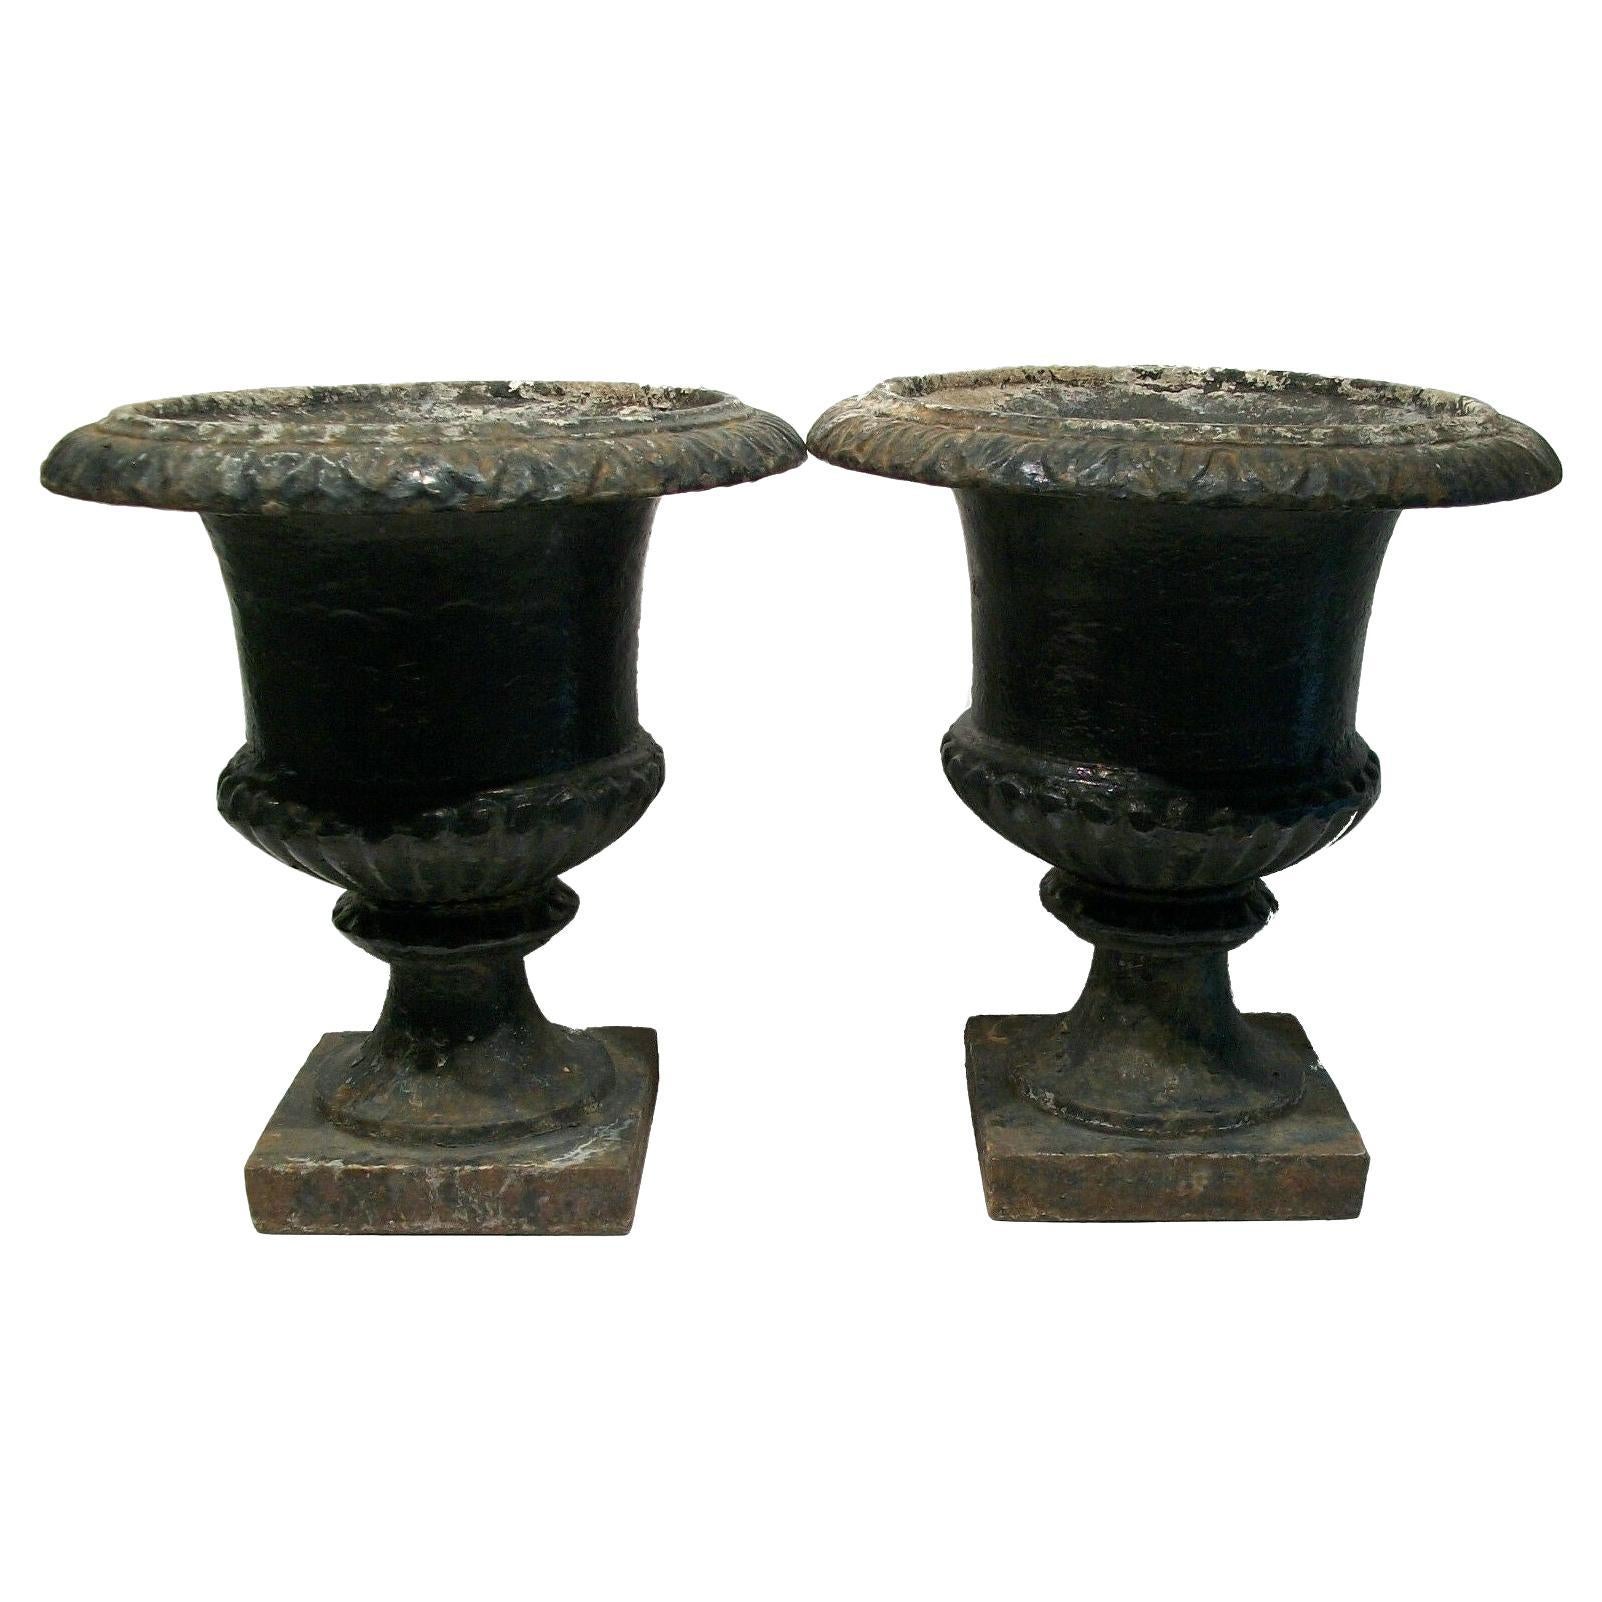 Antique Pair of Campagna Form Cast Iron Garden Urns, U.S., Late 19th Century